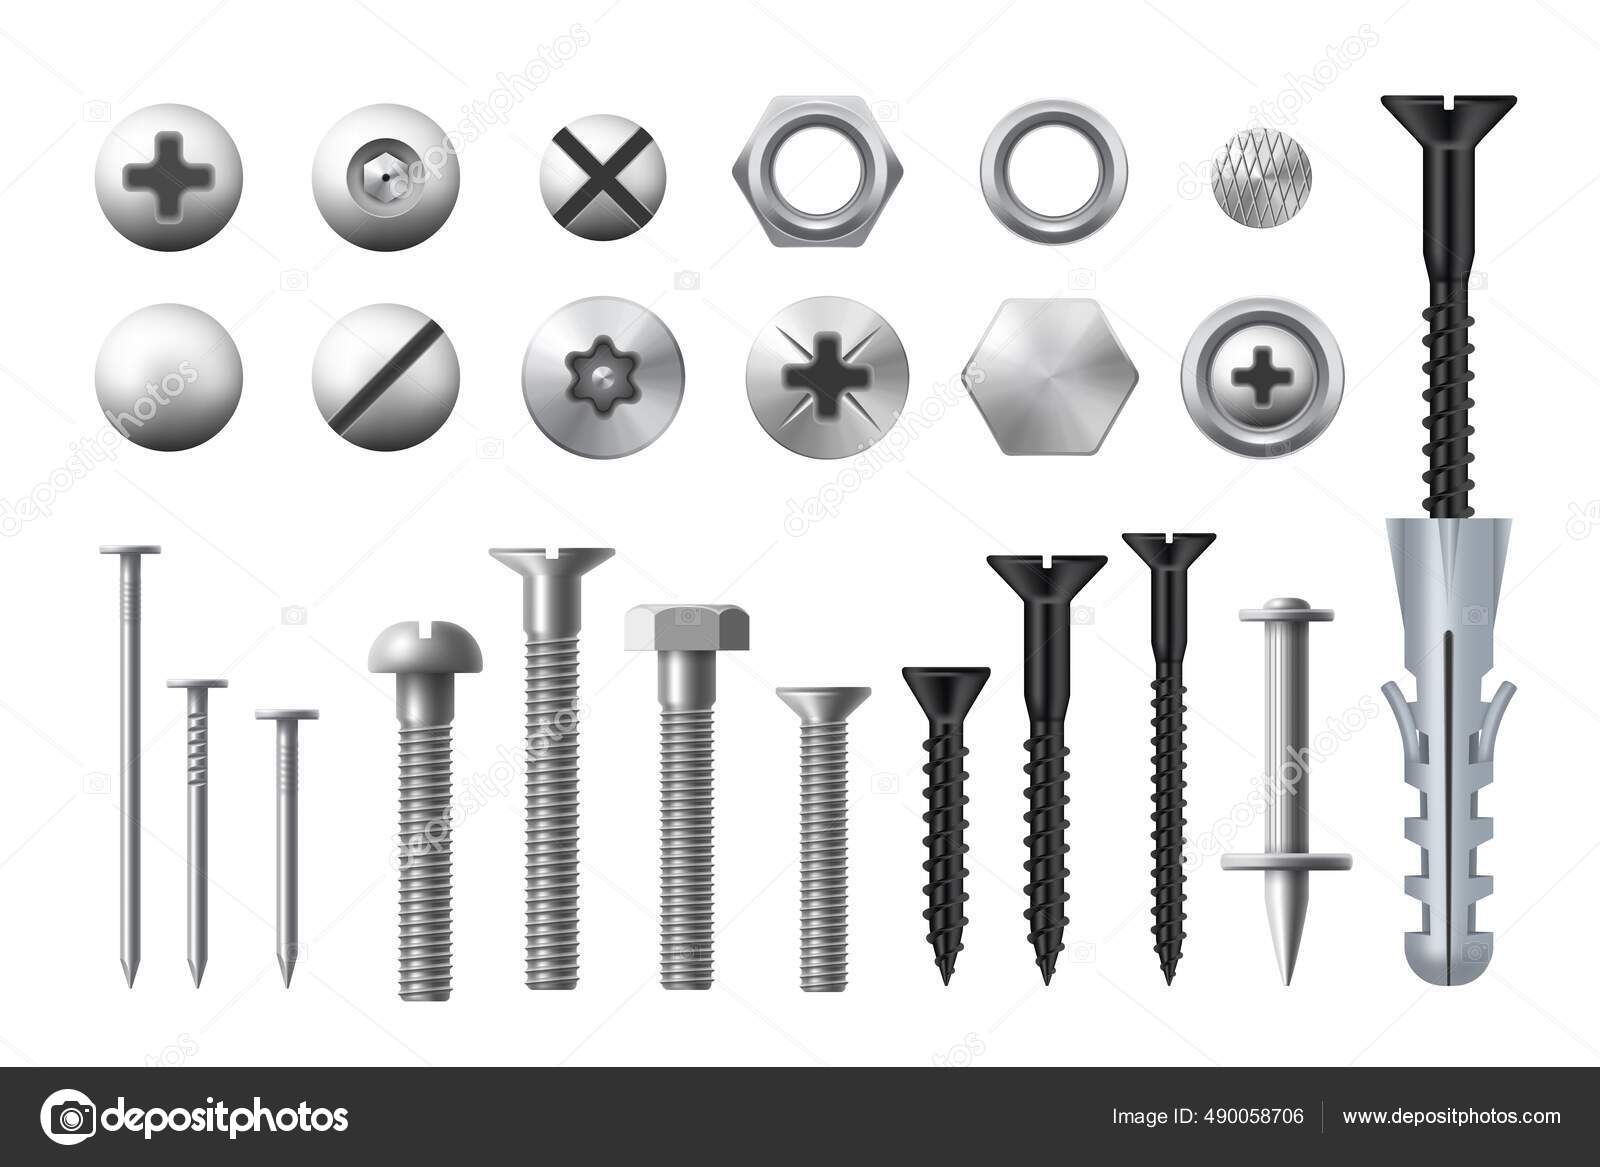 Premium Vector | Set of realistic nails straight hammered into wall with  steel or silver pin heads. metal hardware spikes or hobnails with grey  caps. 3d vector illustration